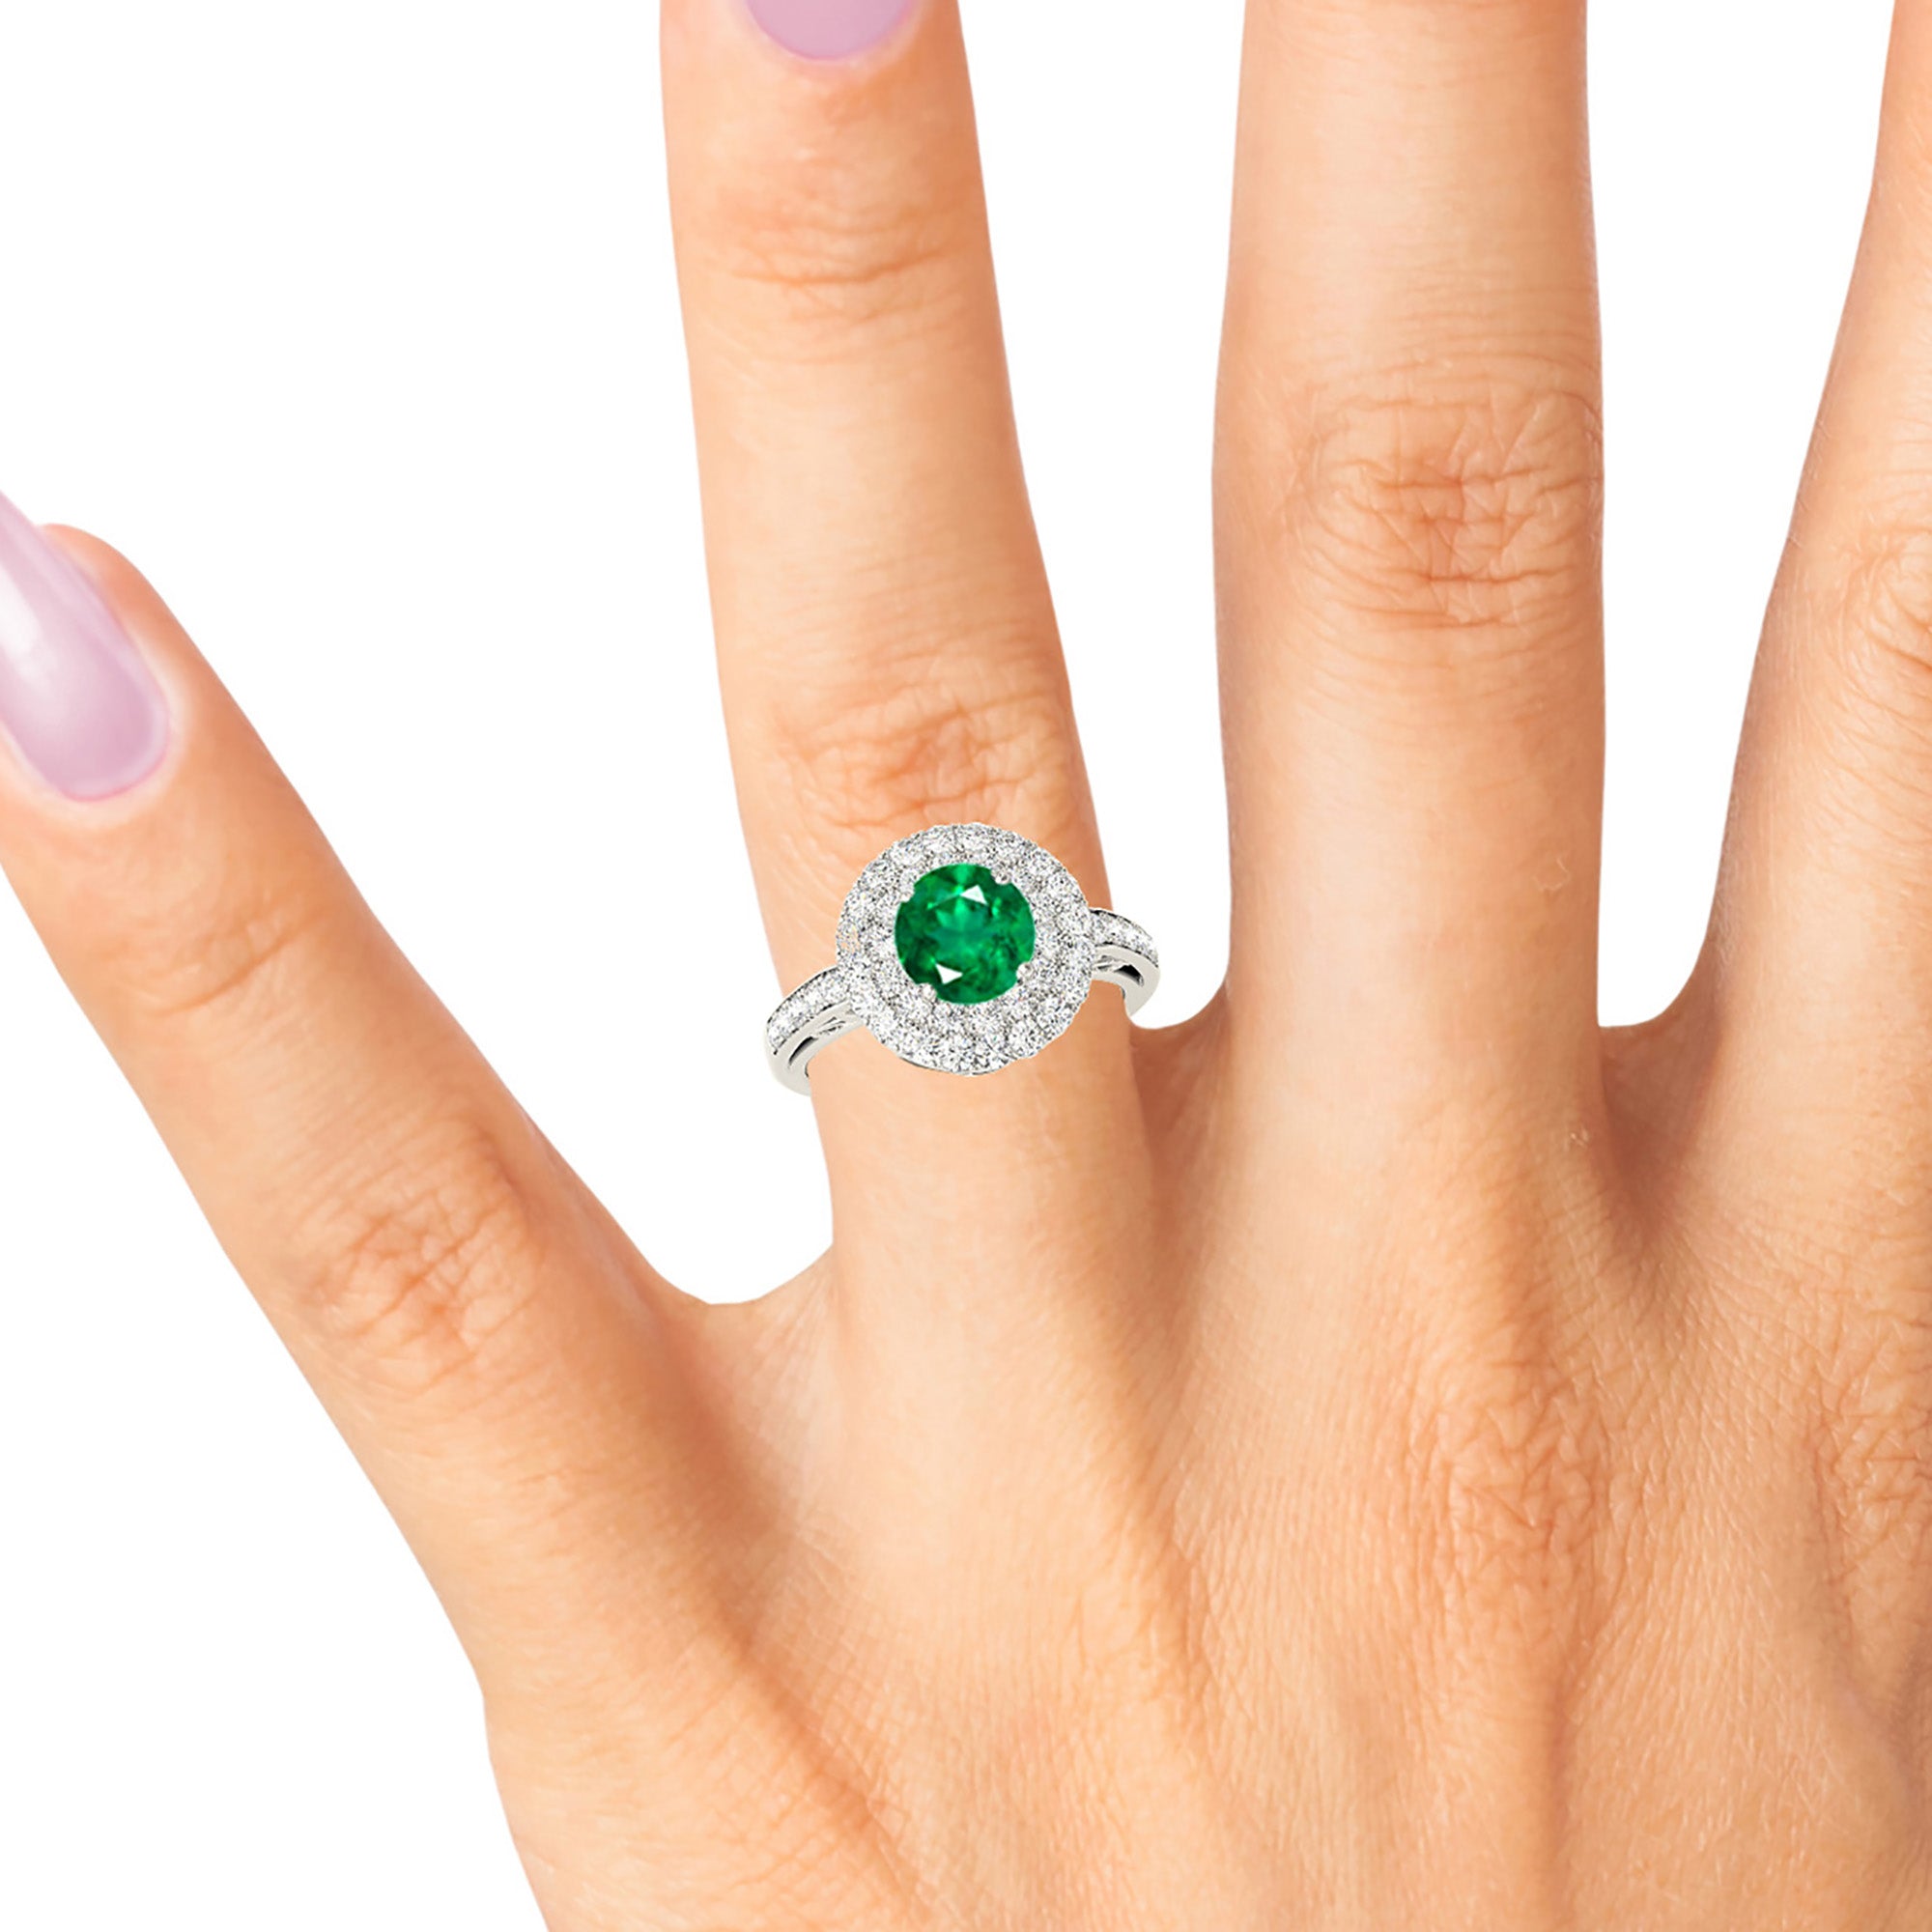 1.14 ct. Genuine Emerald Double Halo Ring With 1.00 ctw. Pave Set Under Halo and Side Diamonds-in 14K/18K White, Yellow, Rose Gold and Platinum - Christmas Jewelry Gift -VIRABYANI